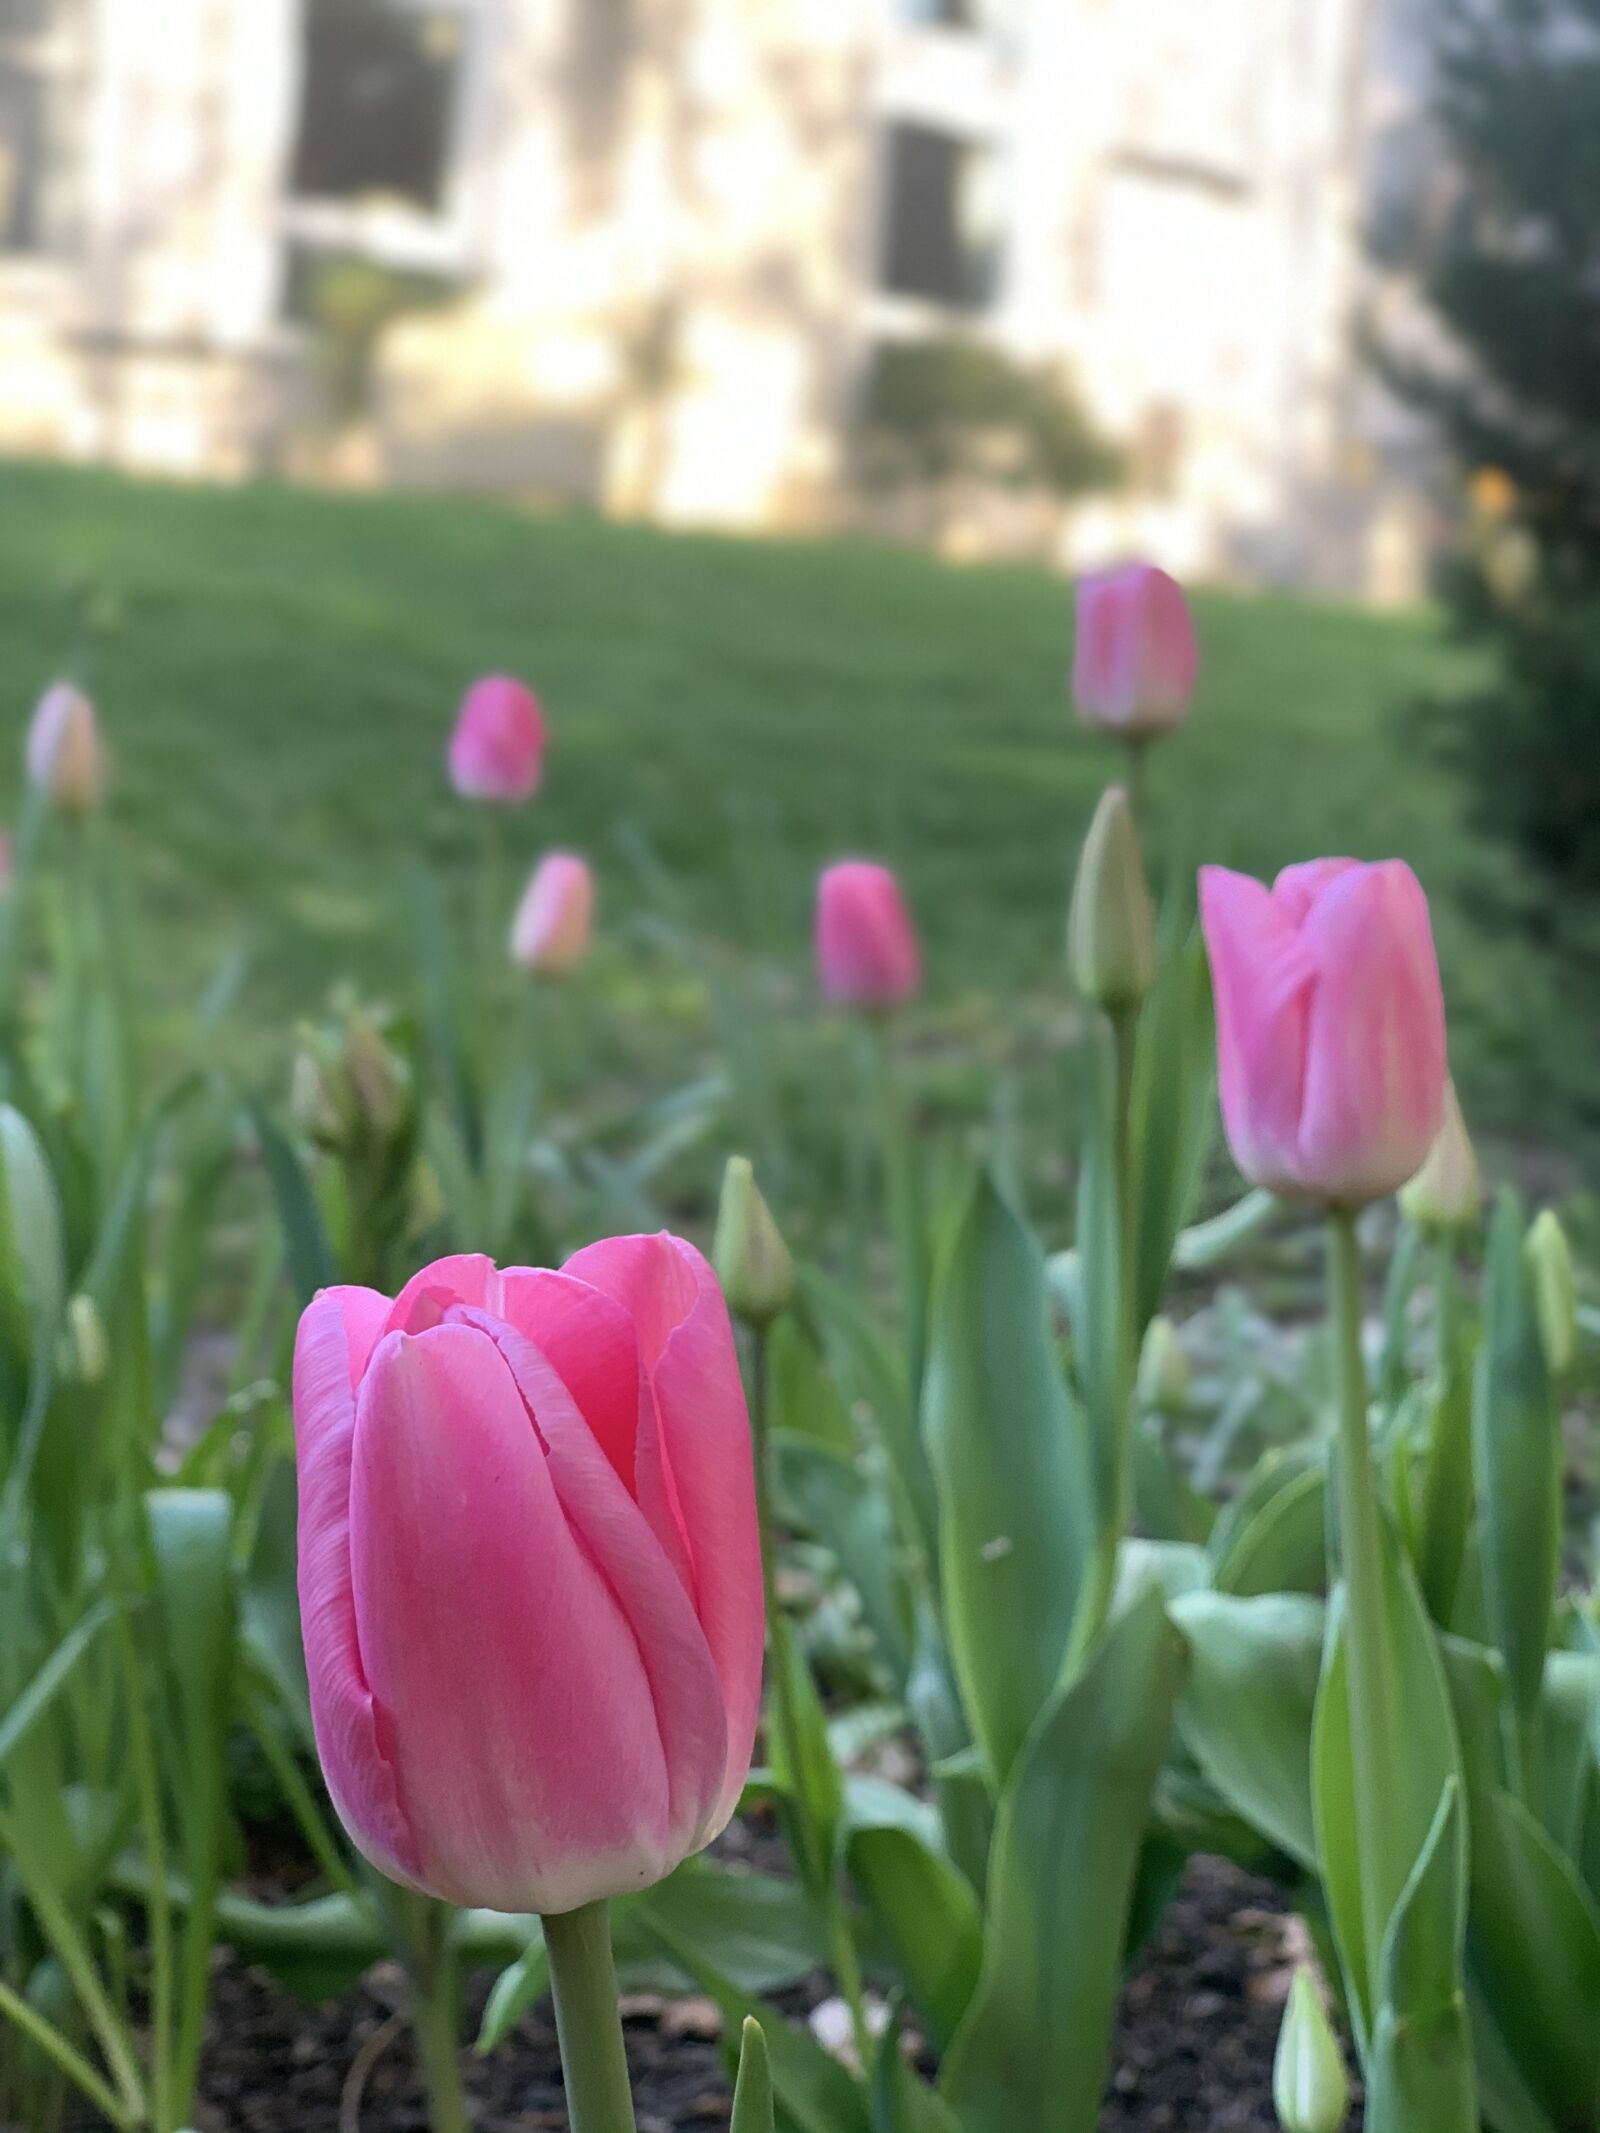 iPhone XS back dual camera 6mm f/2.4 sample photo. Flowers, tulips, tulip photography